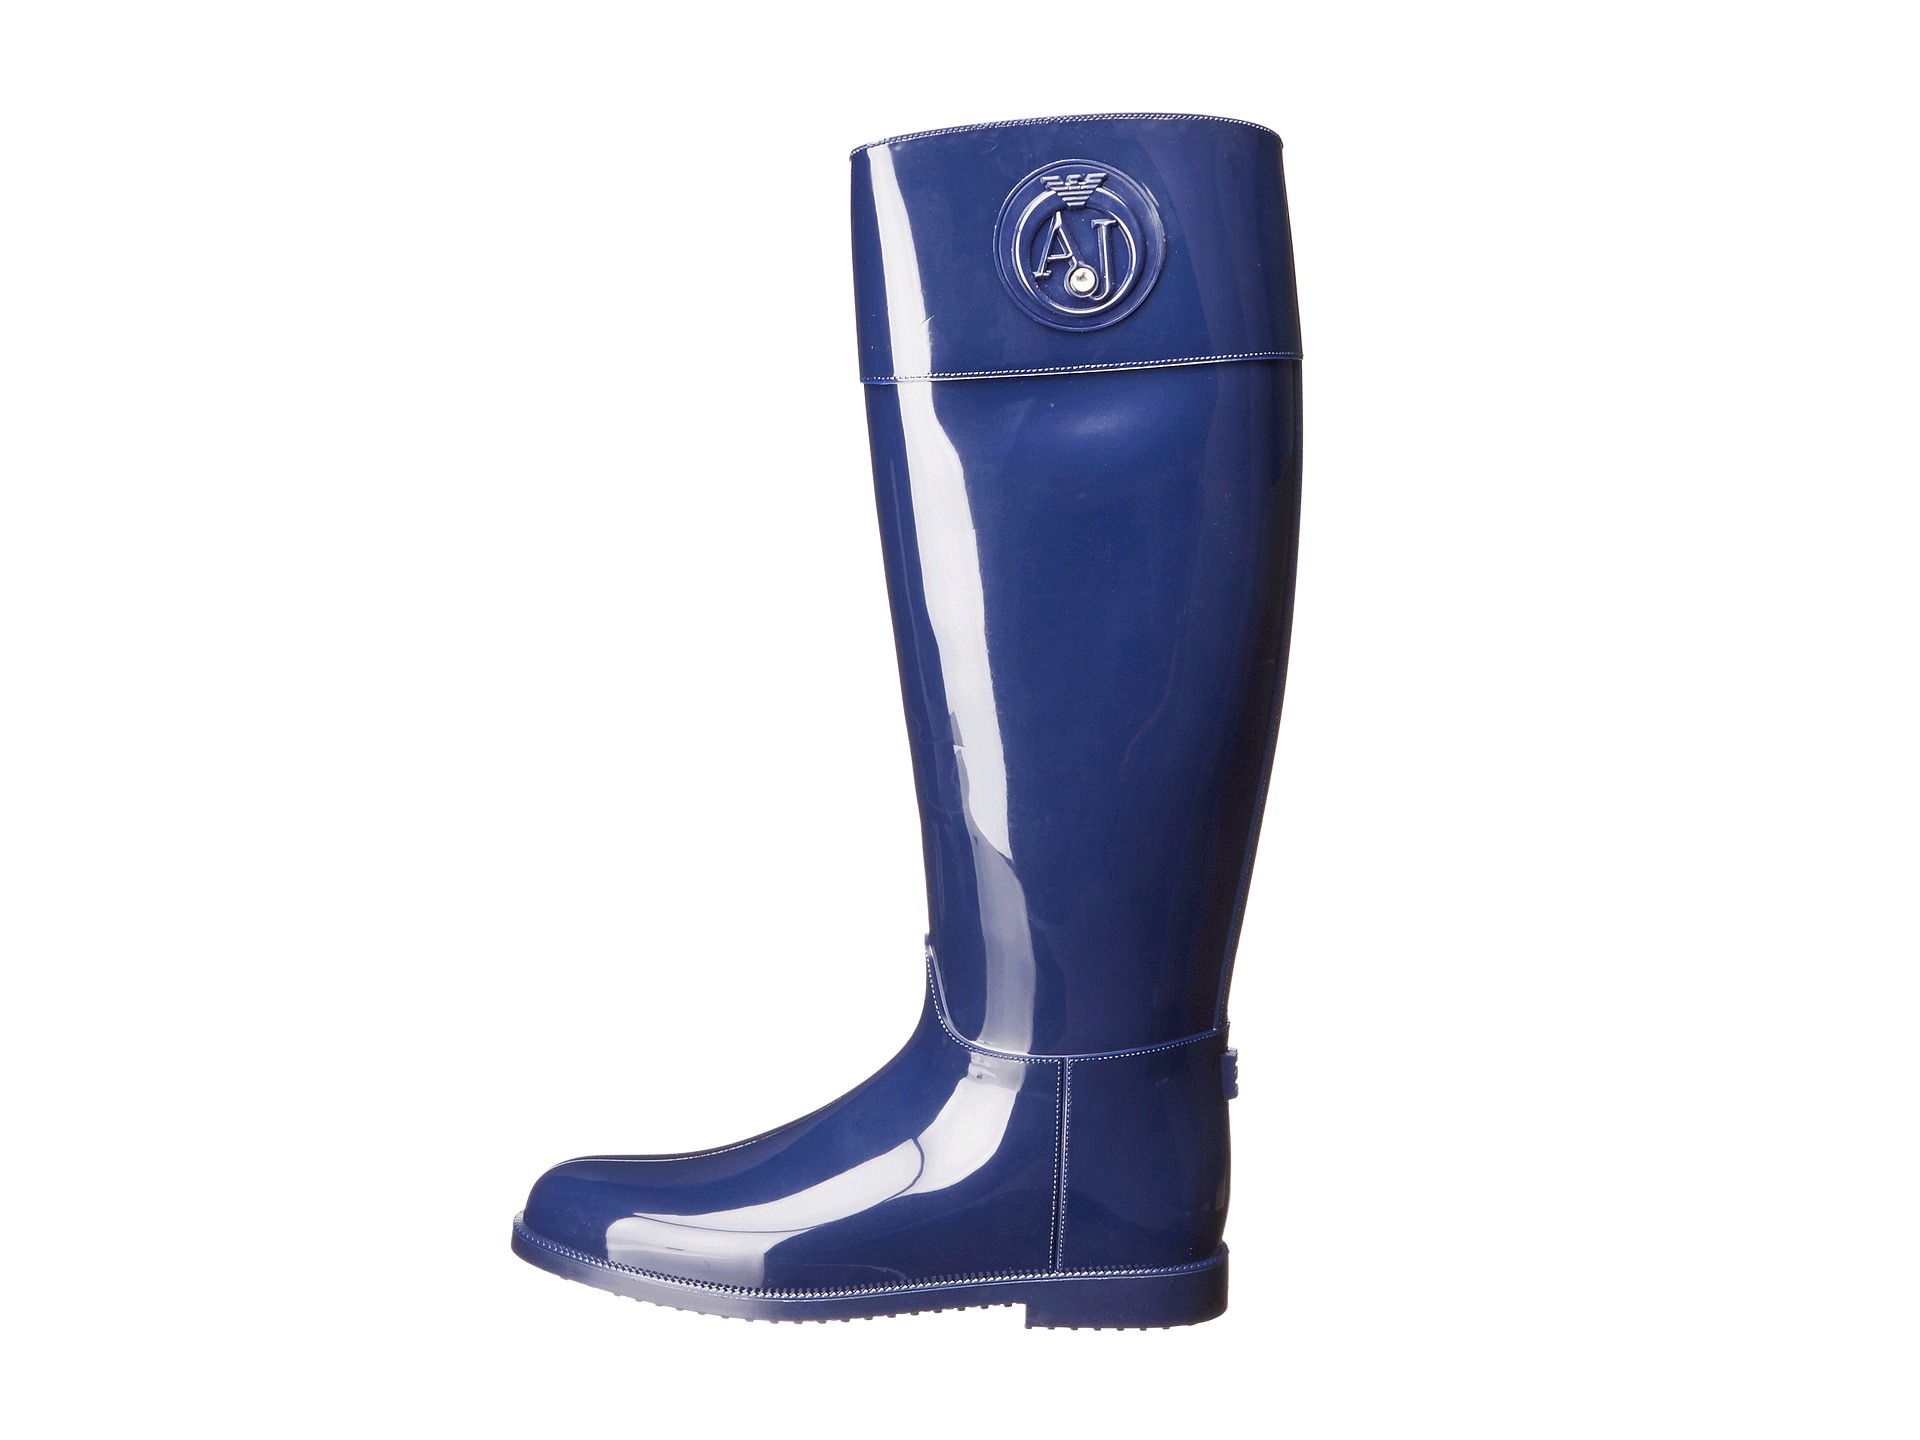 Armani Jeans Rj Rain Boot With Crystal Navy | Shipped Free at Zappos